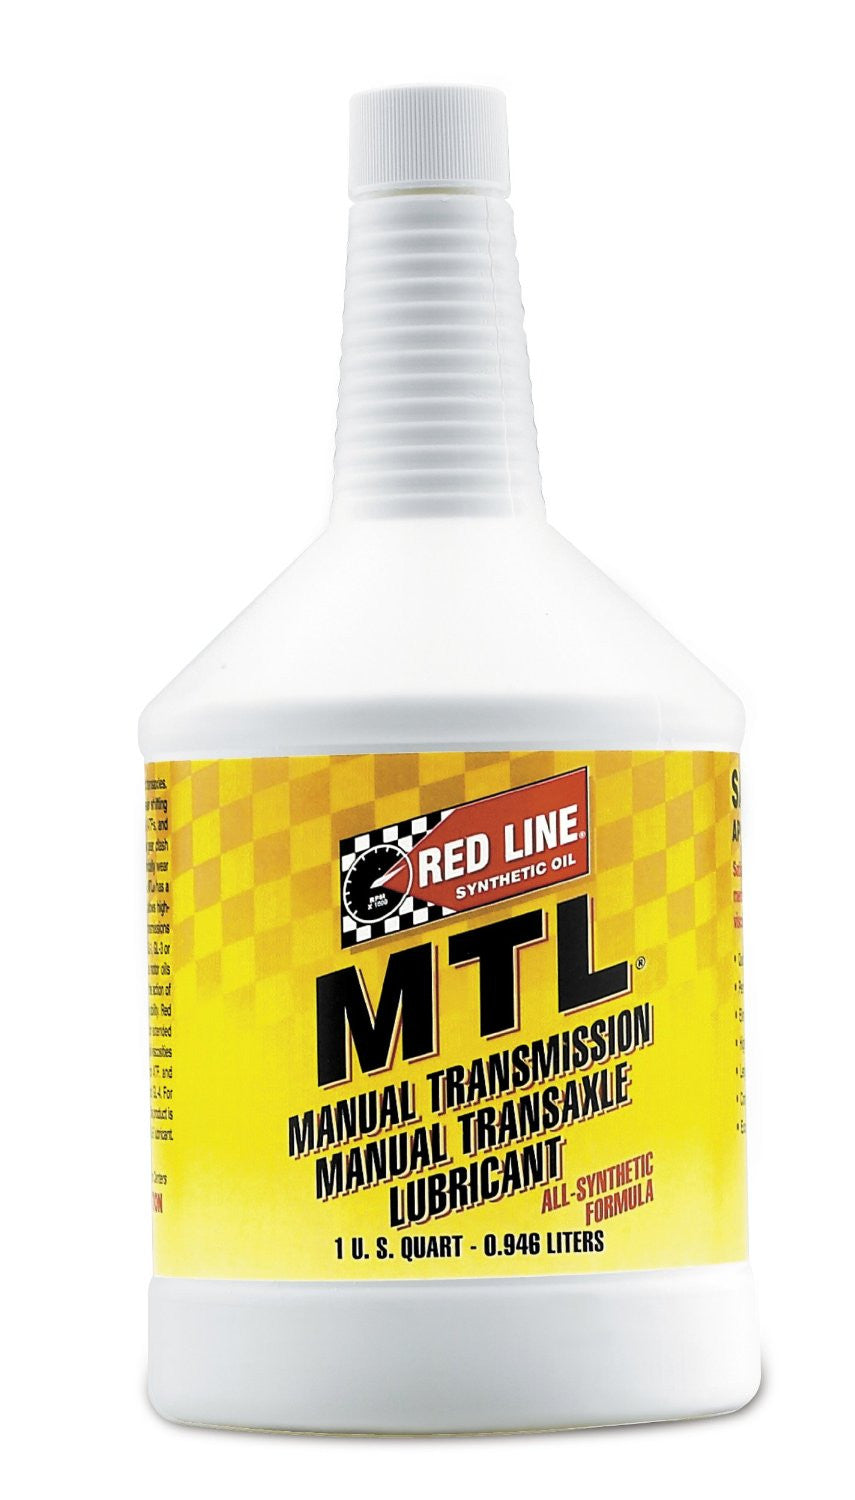 Has anyone tried Redline LV Manual transmission fluid for Toyota's 6-speed  manual?